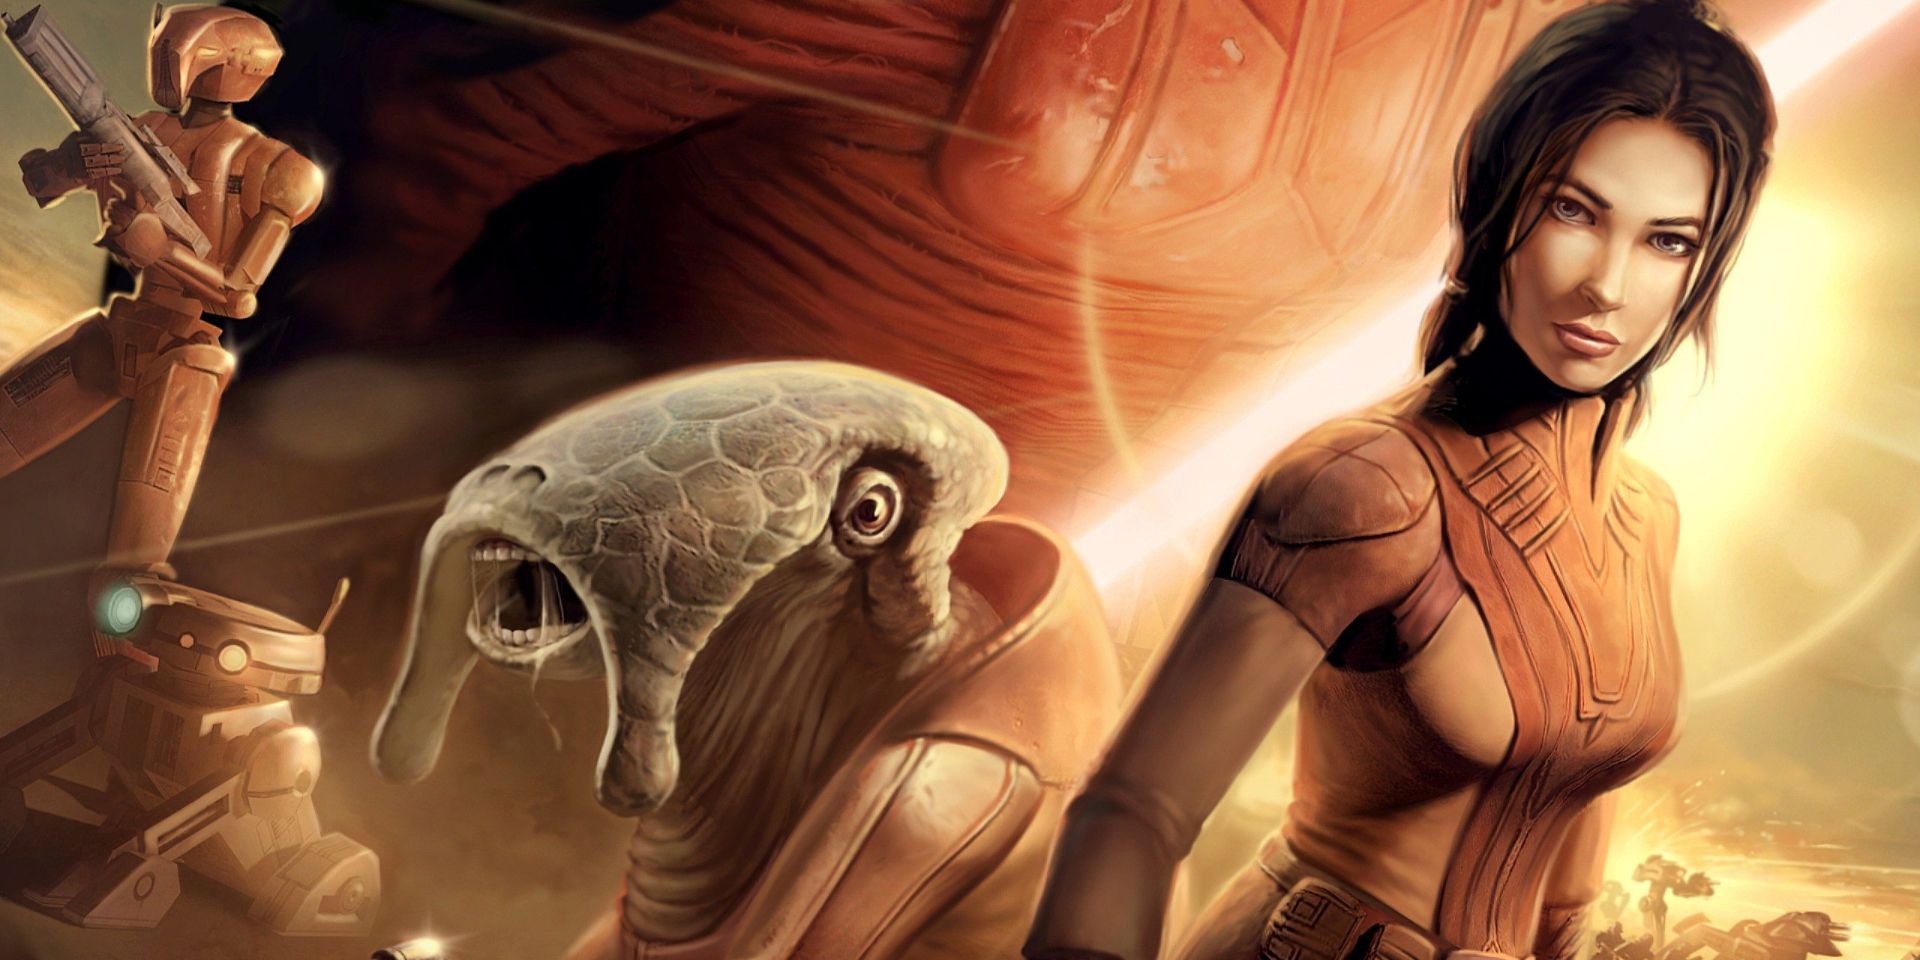 Promotional art featuring characters from the Knights of the Old Republic Star Wars RPG.